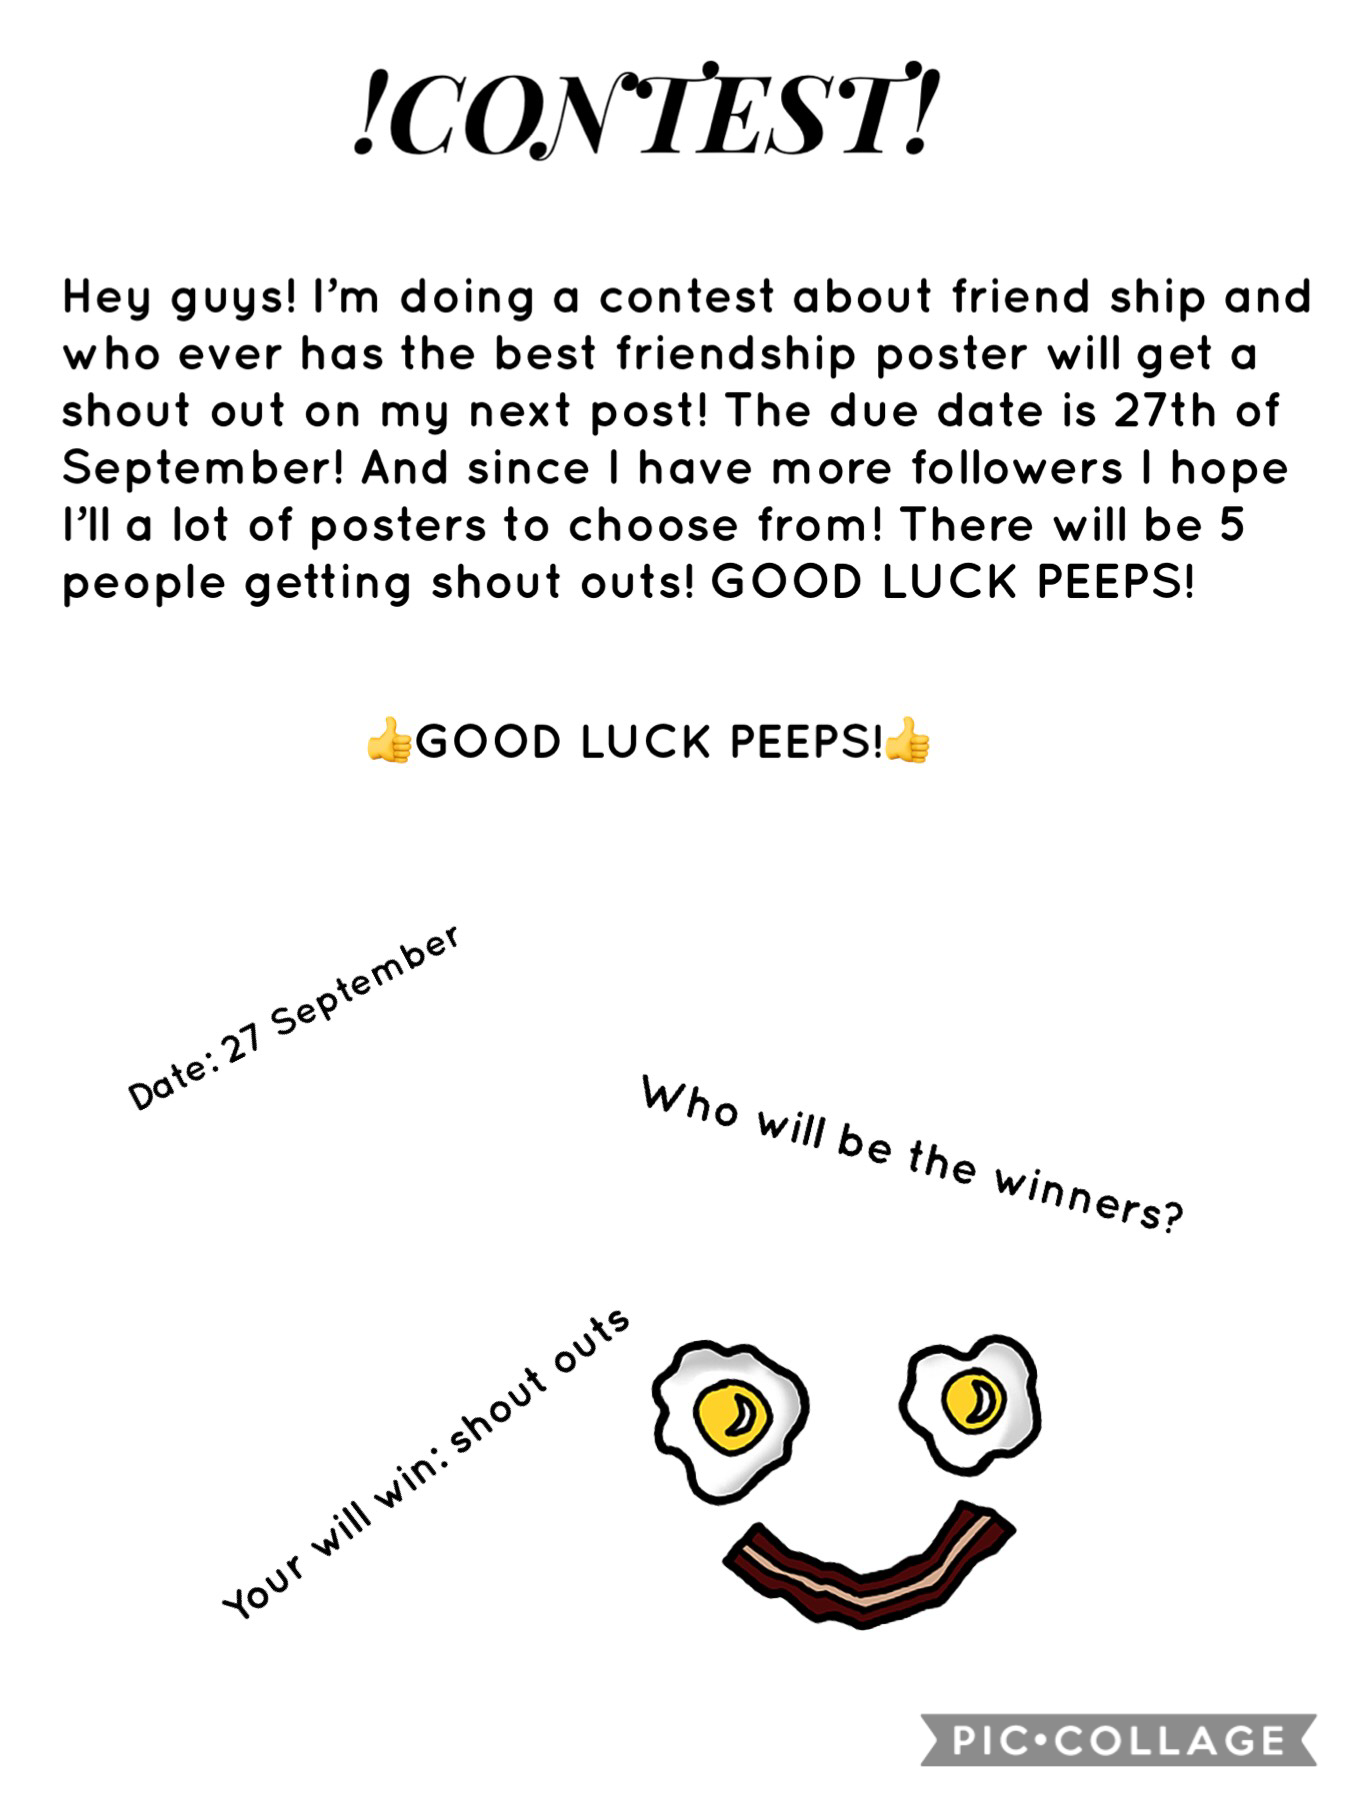 Follow me! And good luck for those who are participating!